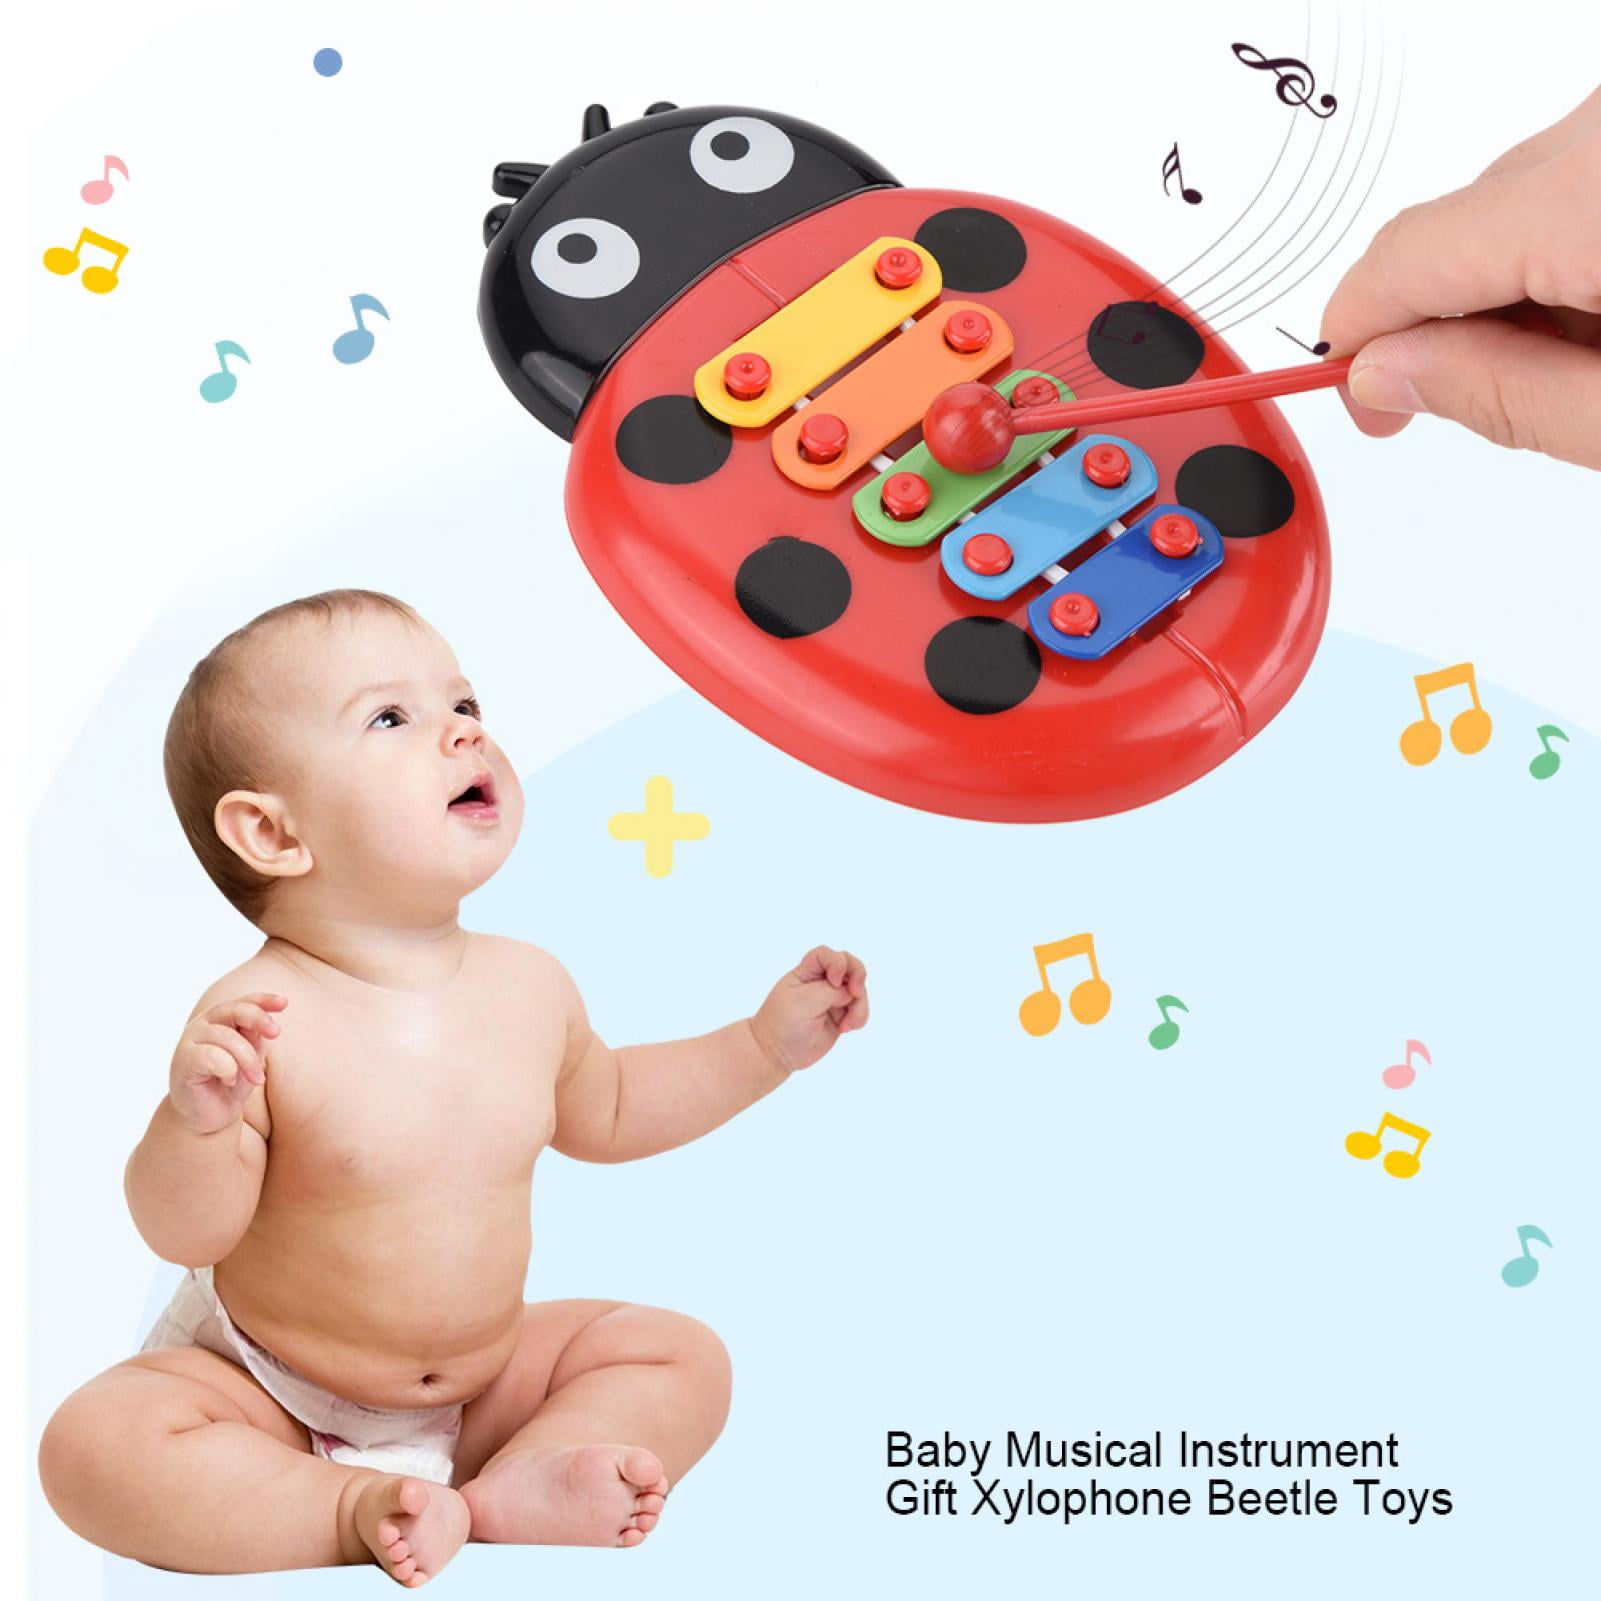 Details about   Colorful Xylophone Toy Non-Toxic Cartoon Ladybug Shape Musical Toy For Baby 